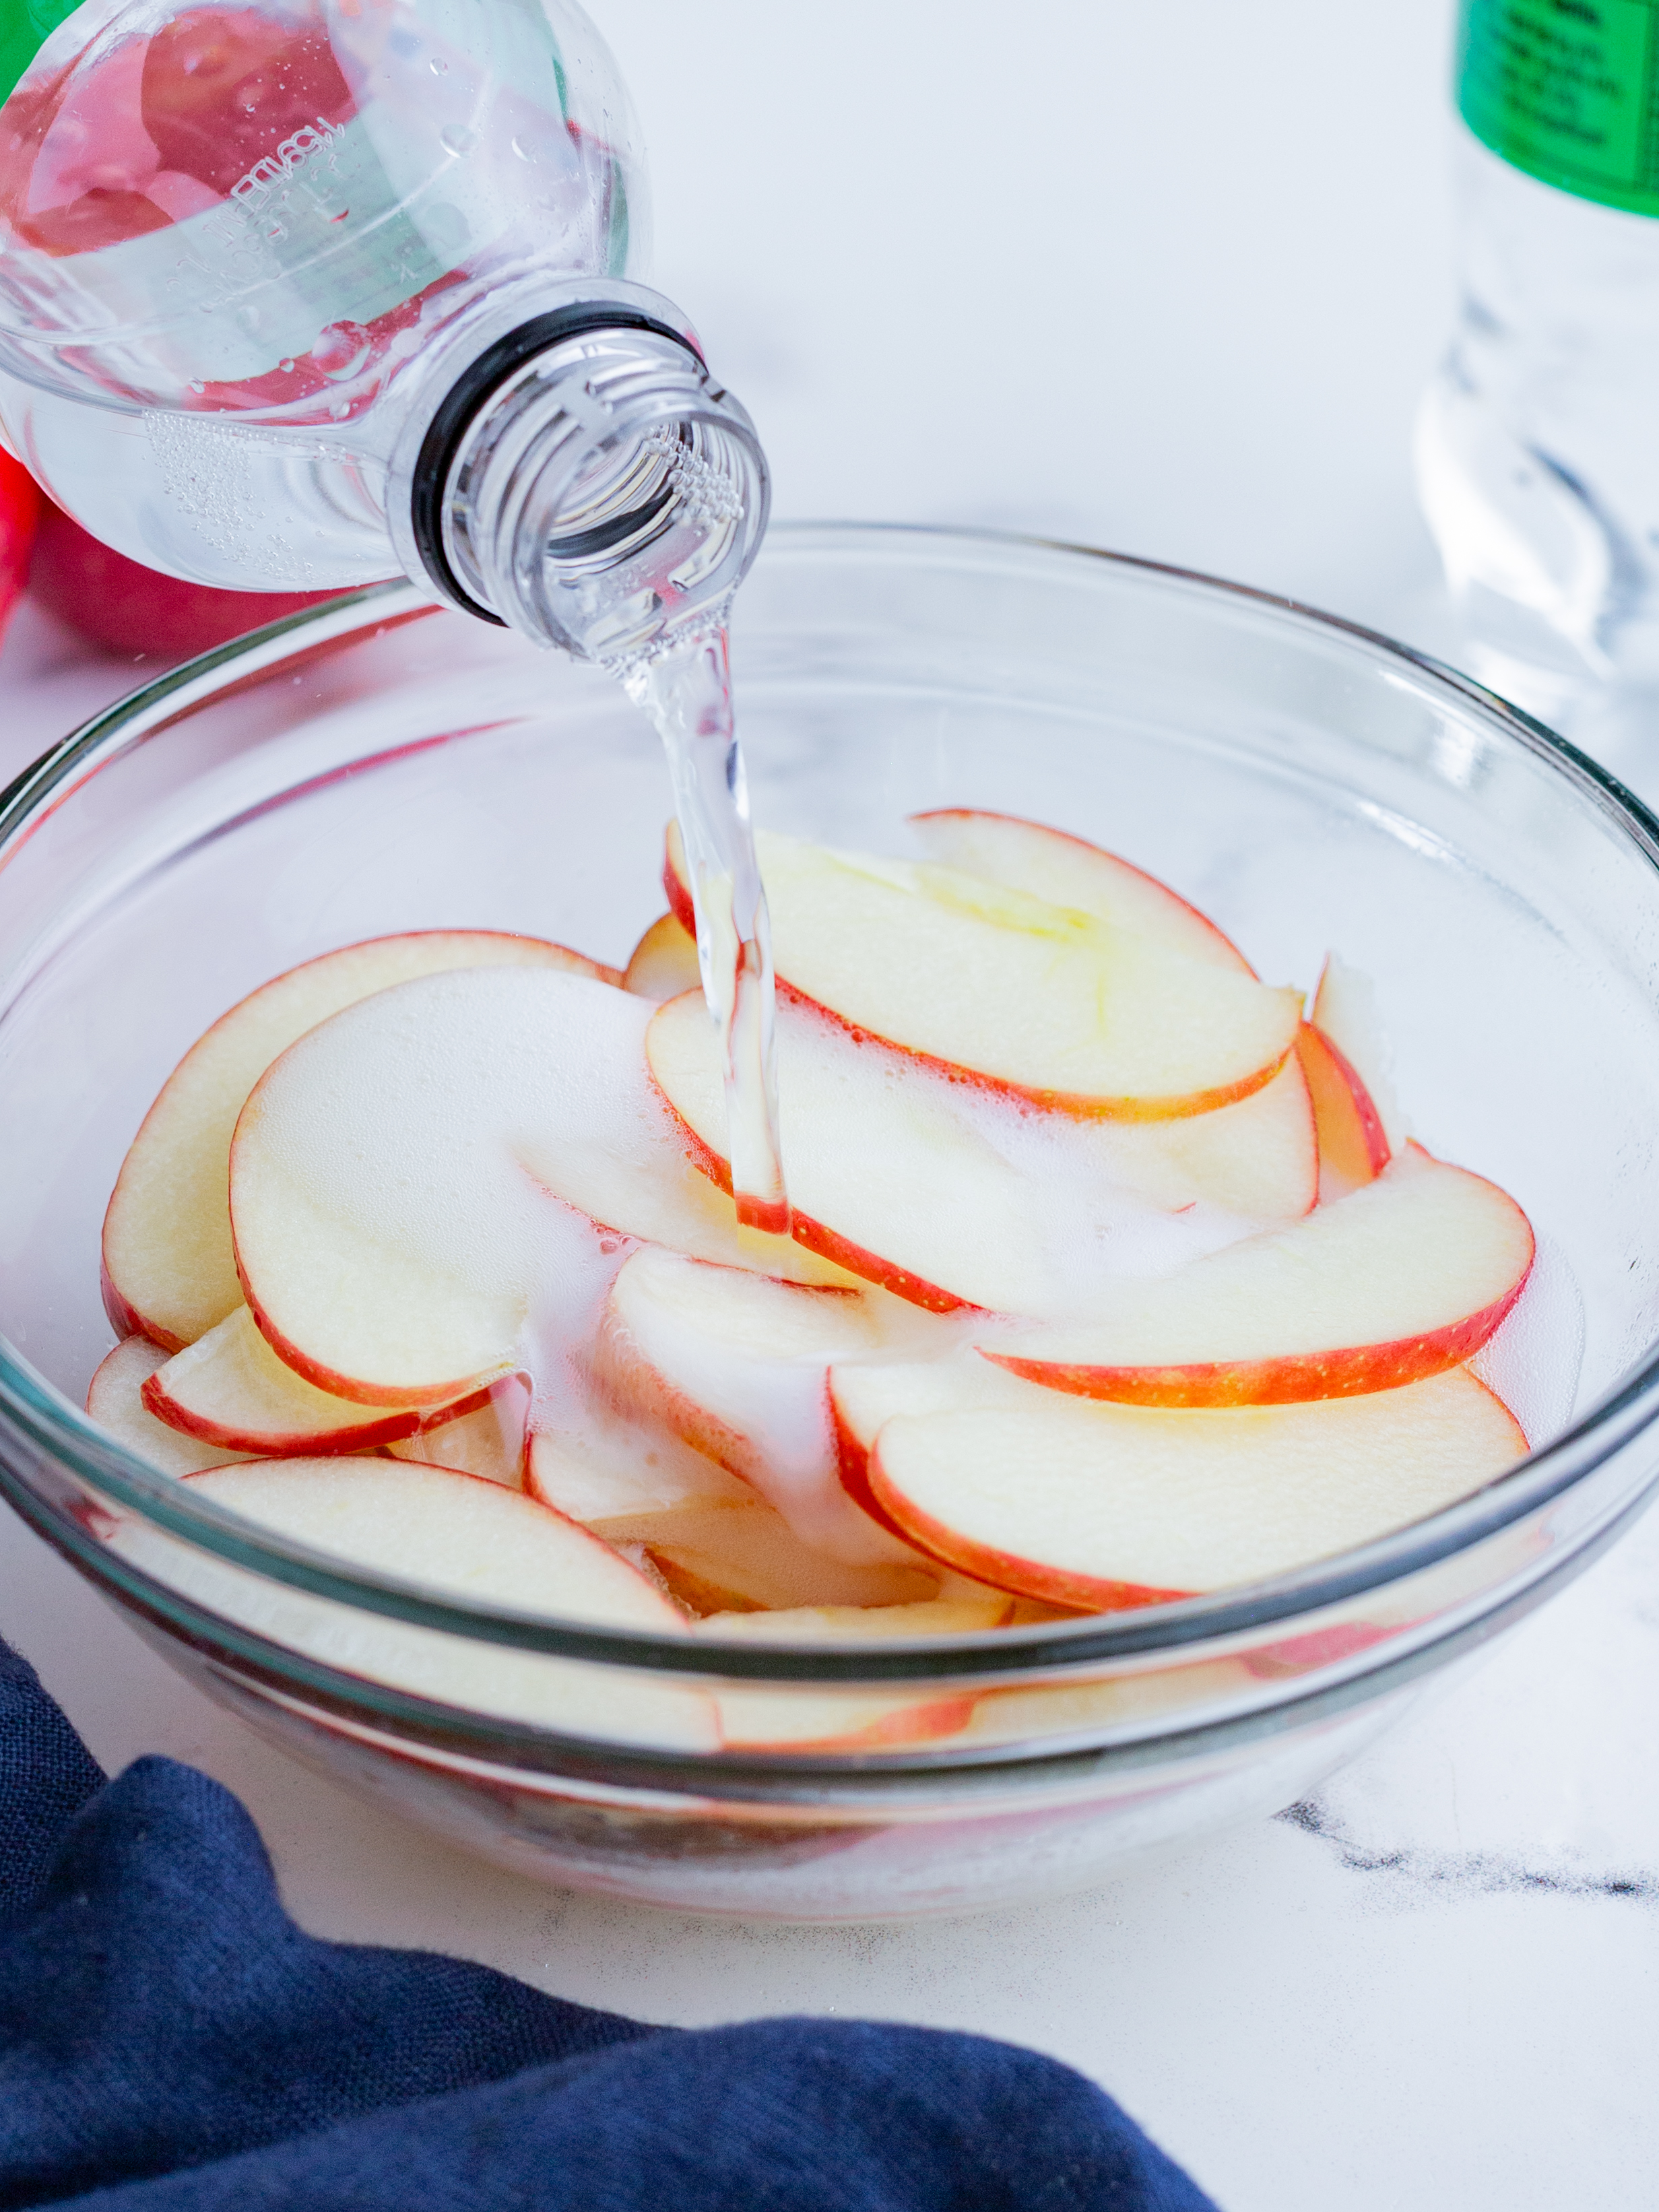 Lemon lime soda being poured over a bowl of sliced apples.